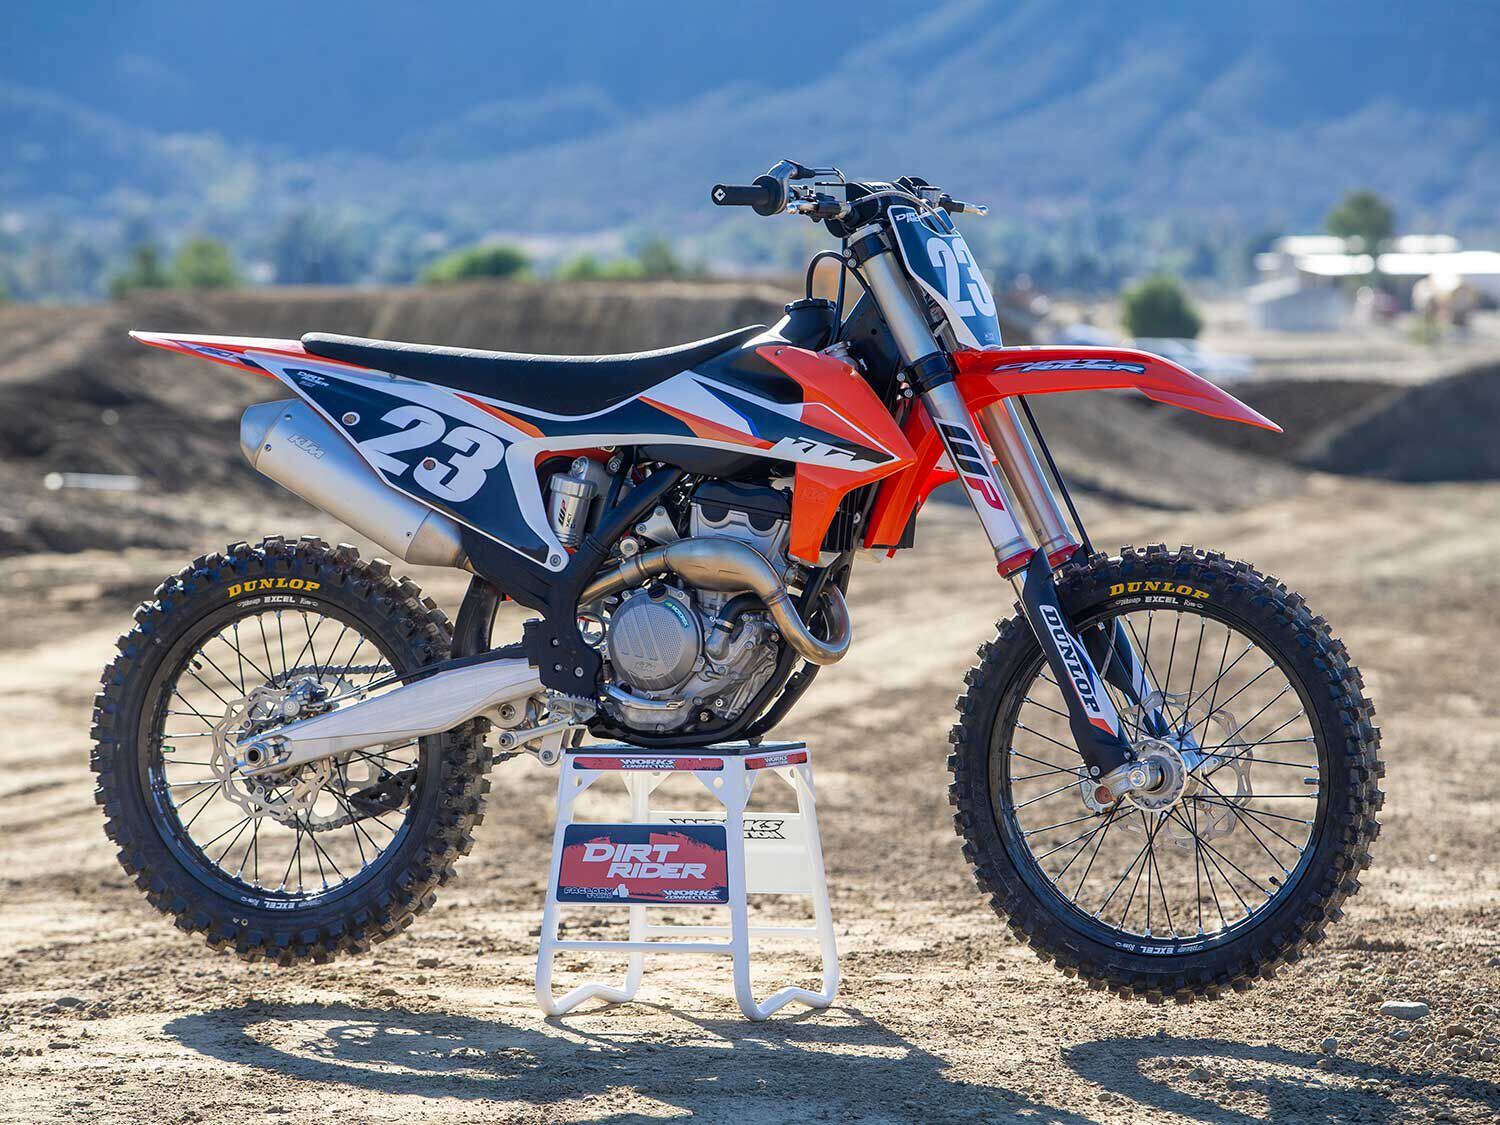 Updates to its WP Xact air fork and WP Xact shock along with the addition of new low-friction linkage bearing seals made by SKF are the mechanical changes the KTM 250 SX-F enjoys for 2021.